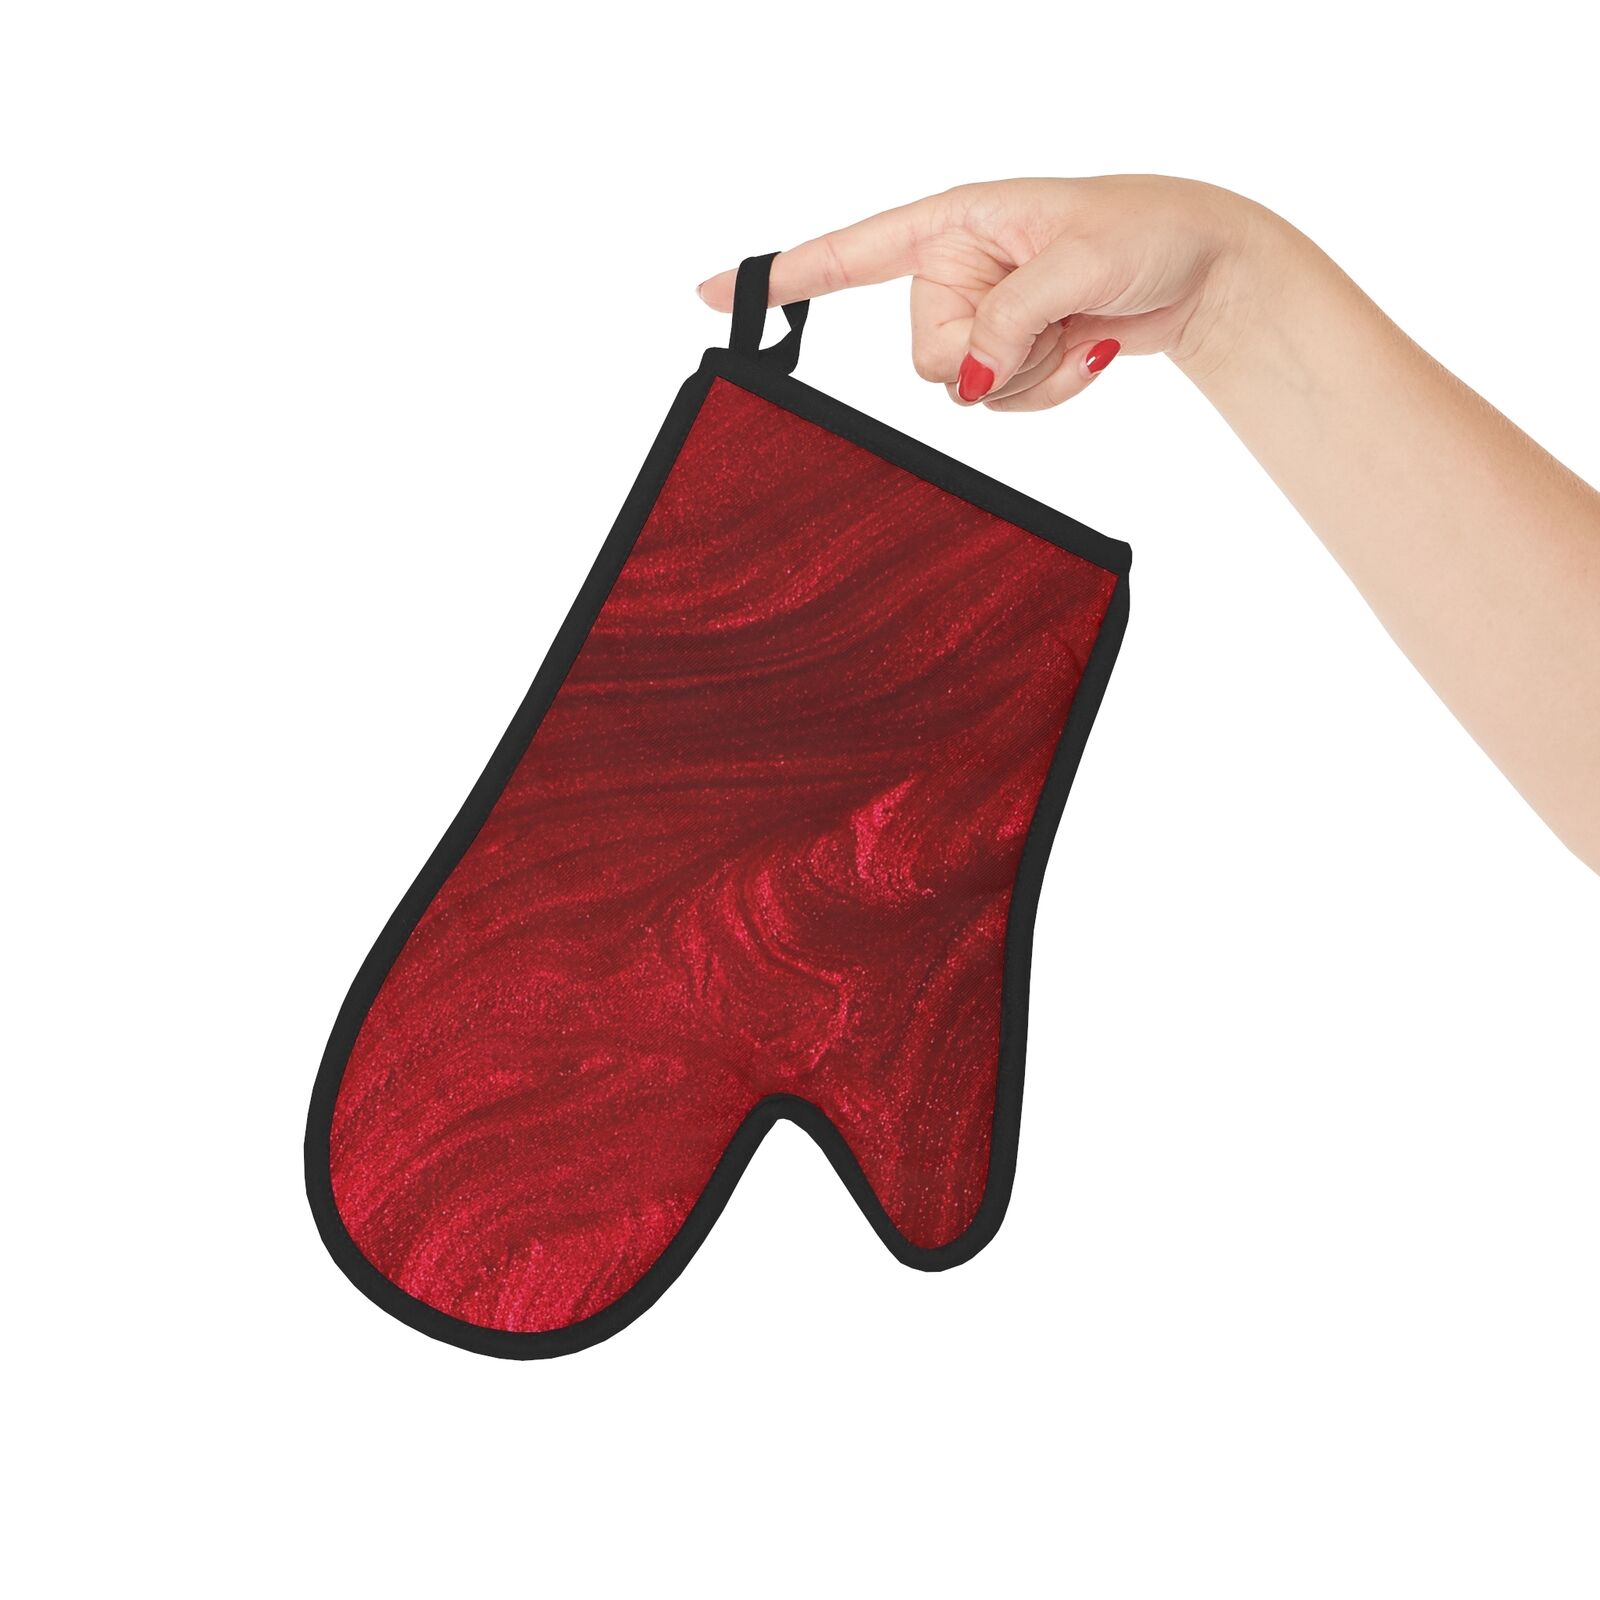 High quality Fashionable and durable Oven Glove